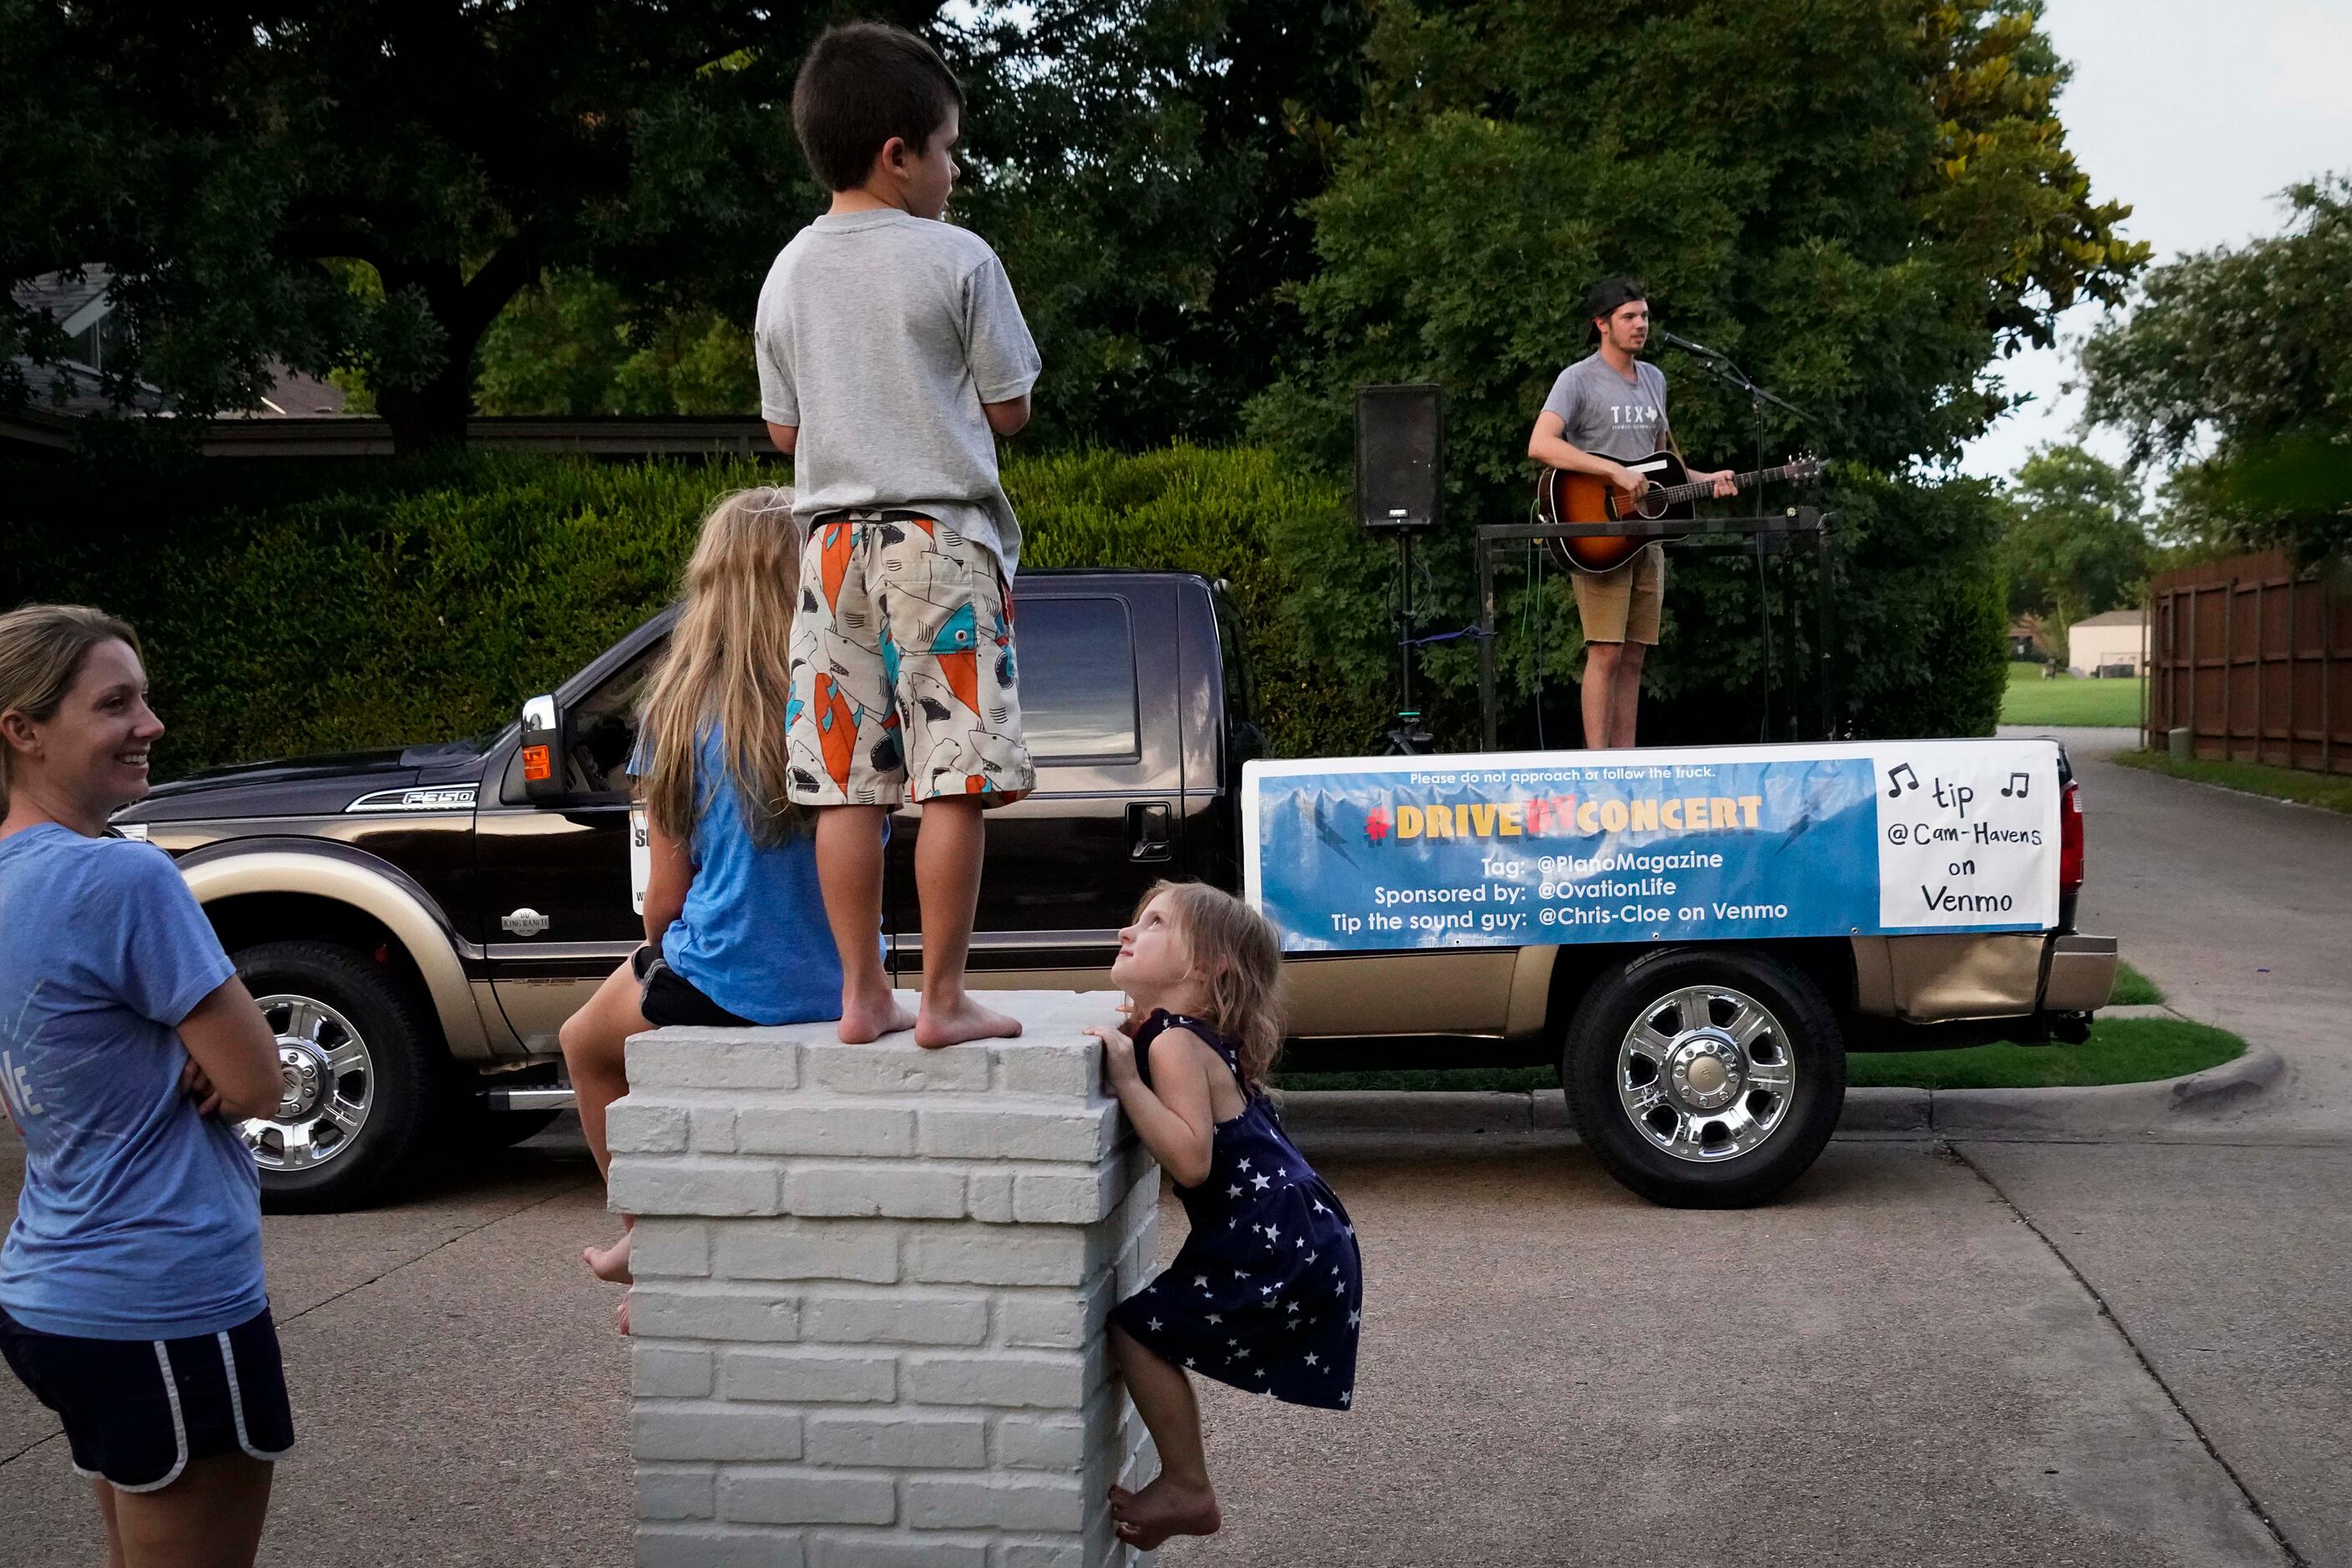 Cameron Havens sings from the back of a pickup truck during a 'Drive By Concert' through the...